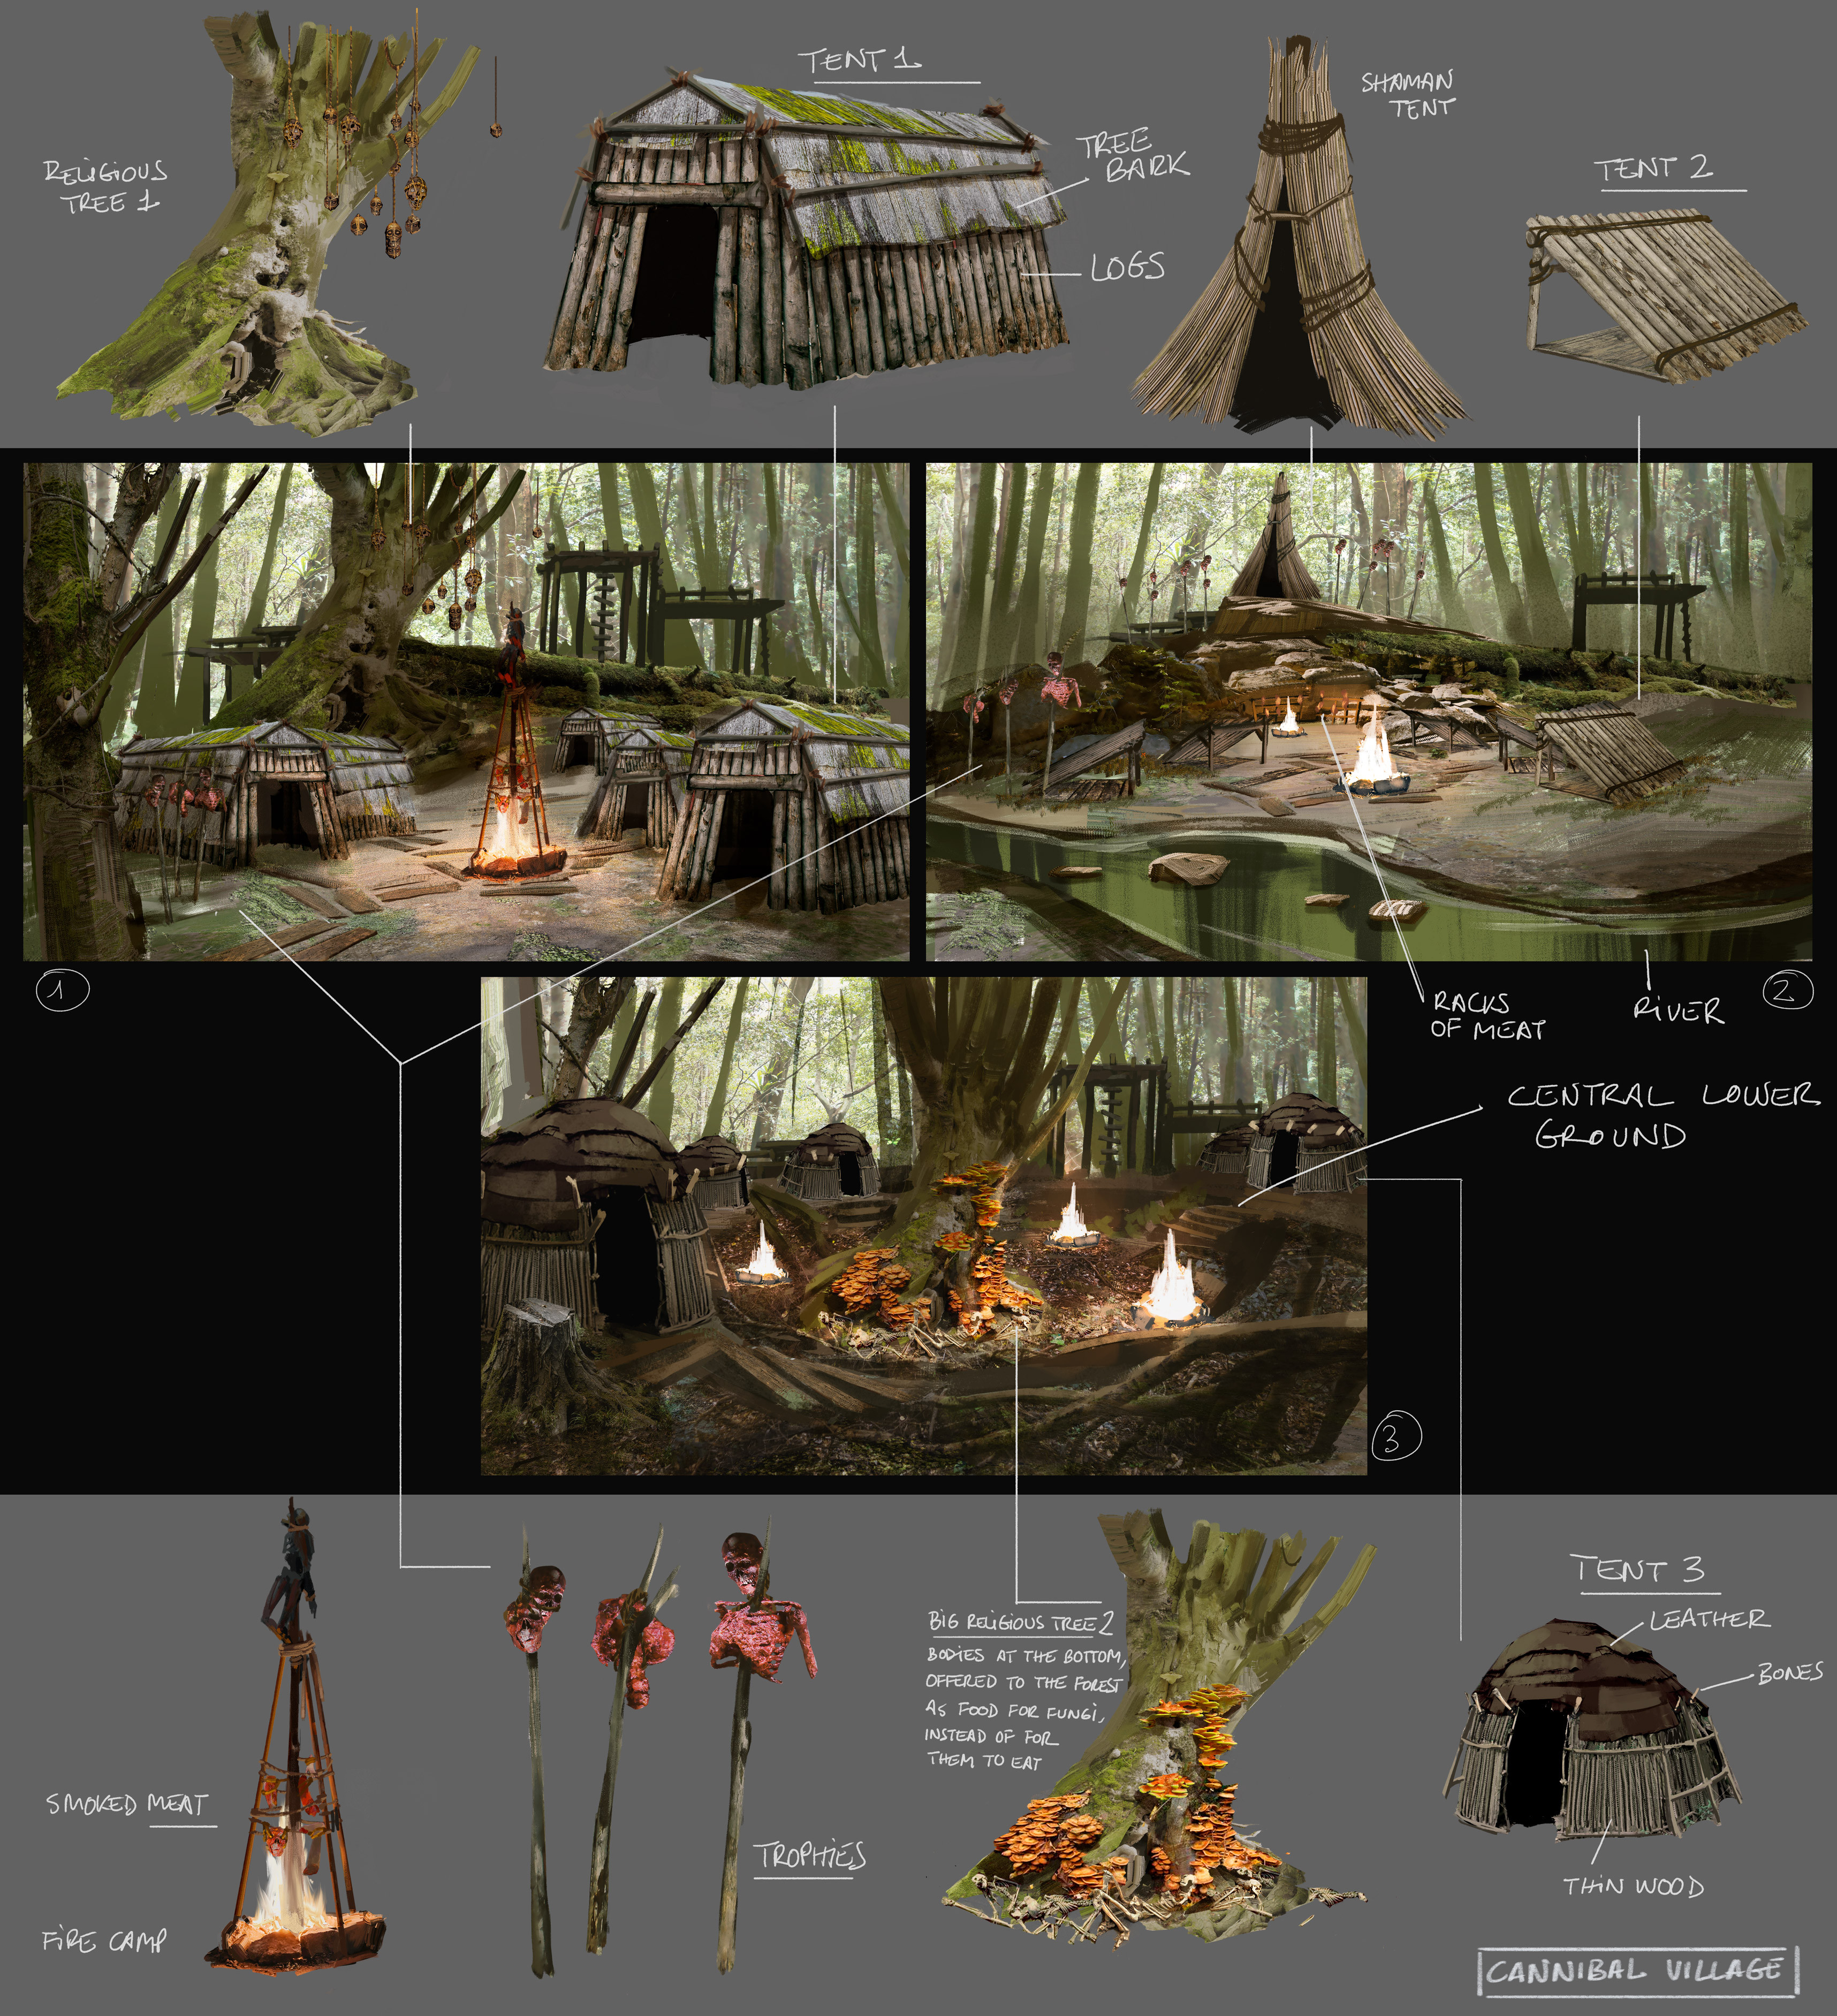 ArtStation - Sons of the Forest - Cannibals Variations